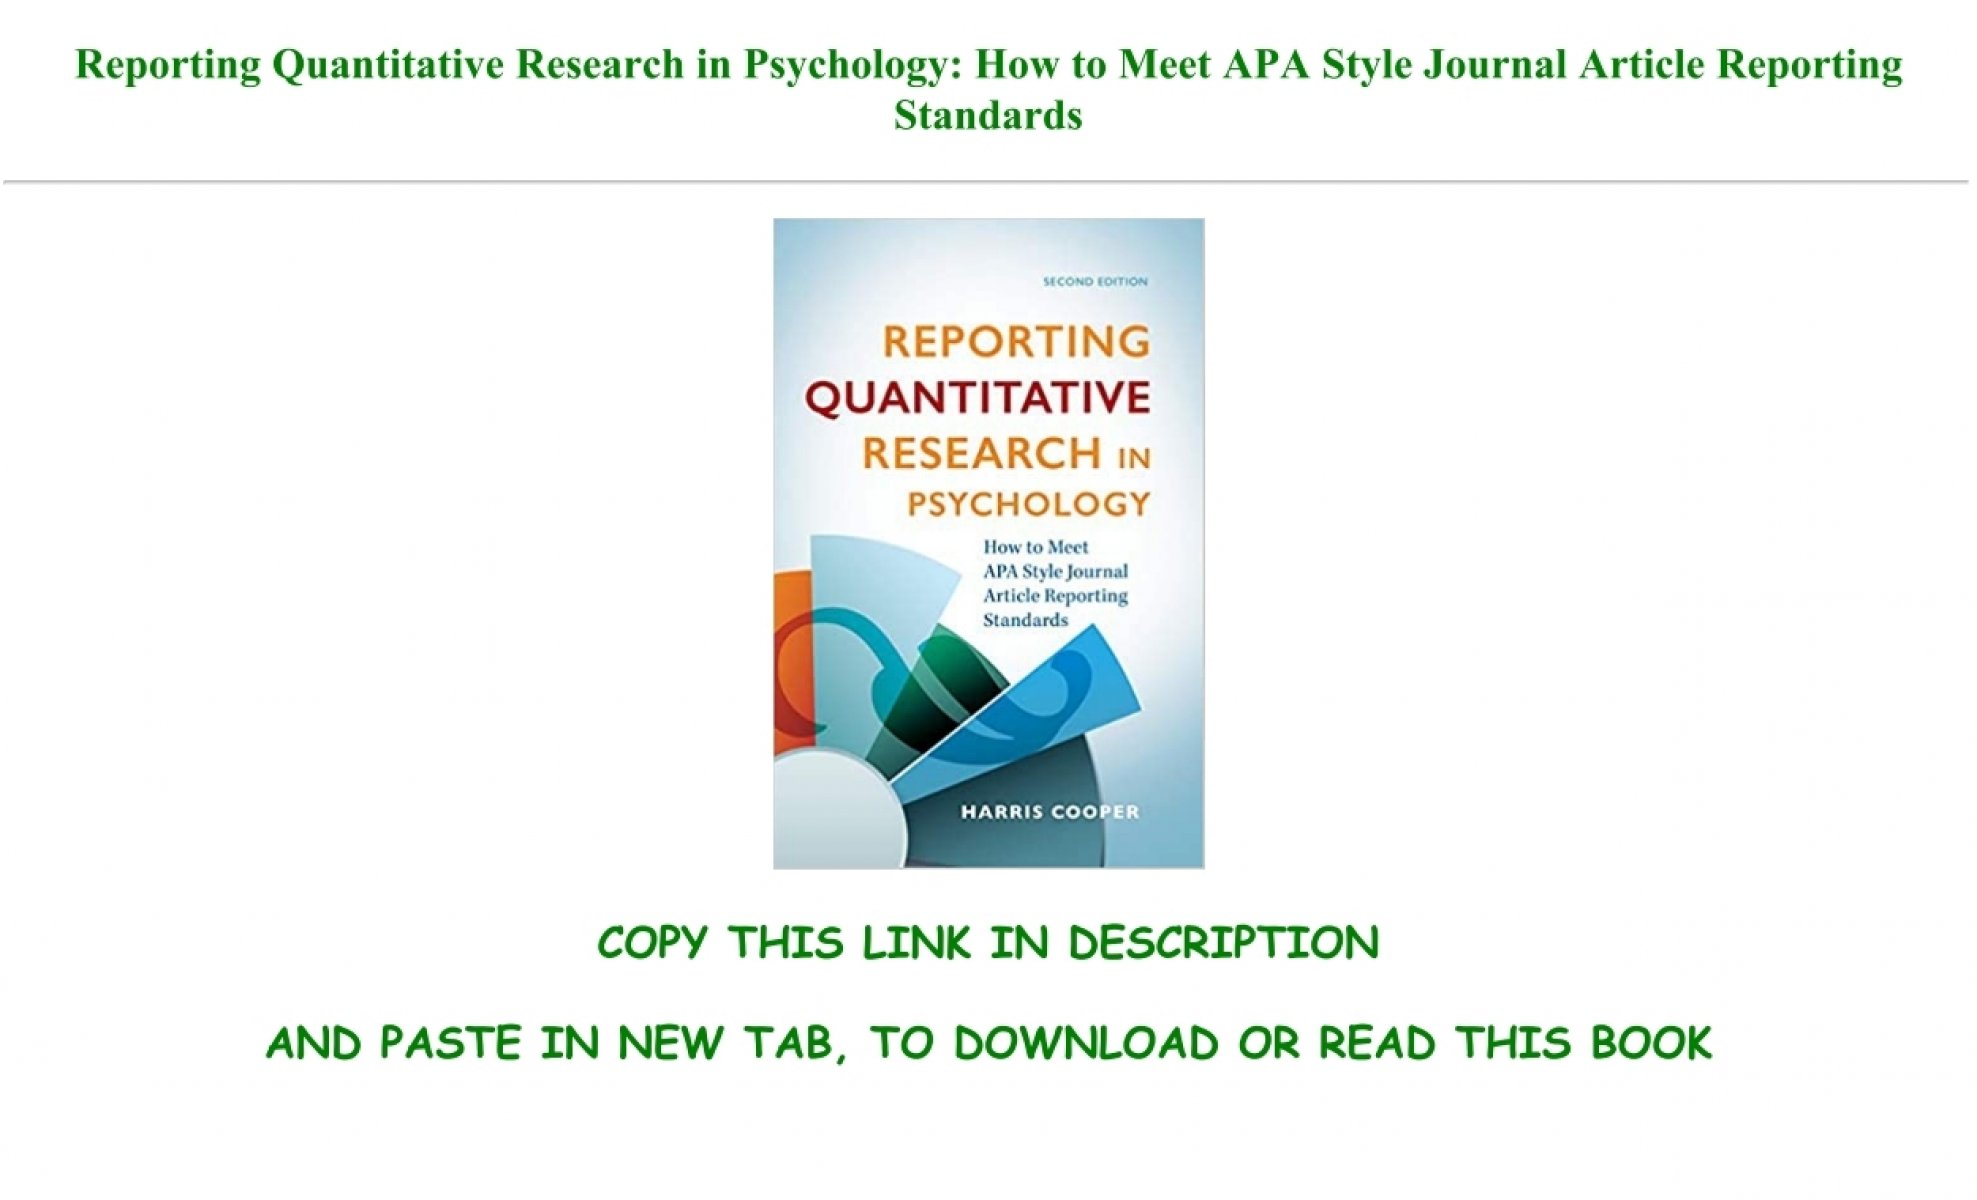 journal article reporting standards for quantitative research